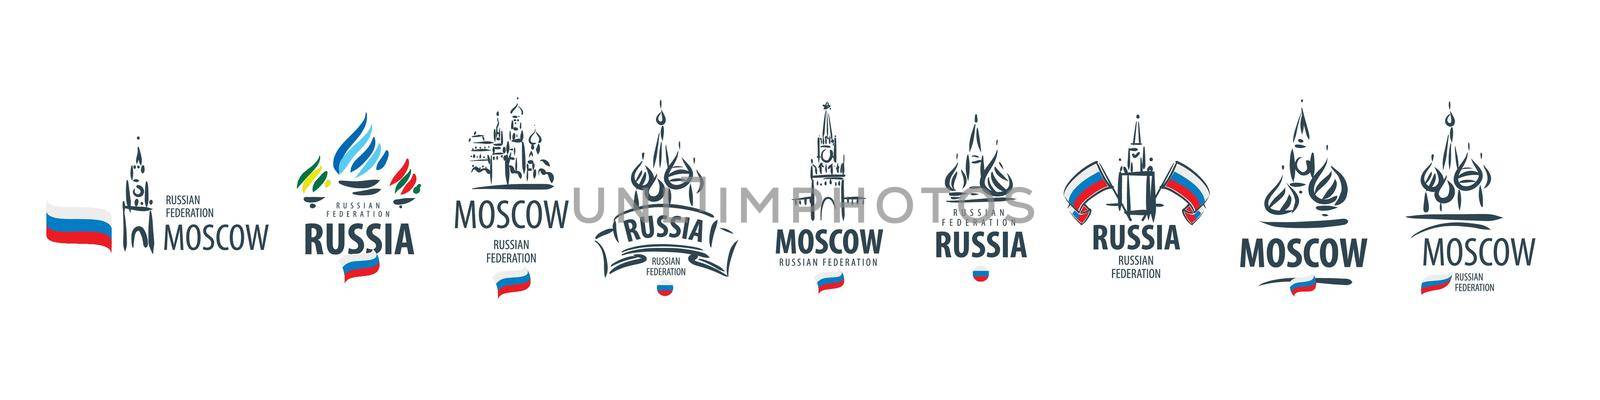 A set of vector icons of Russia, drawn by hand on a white background.